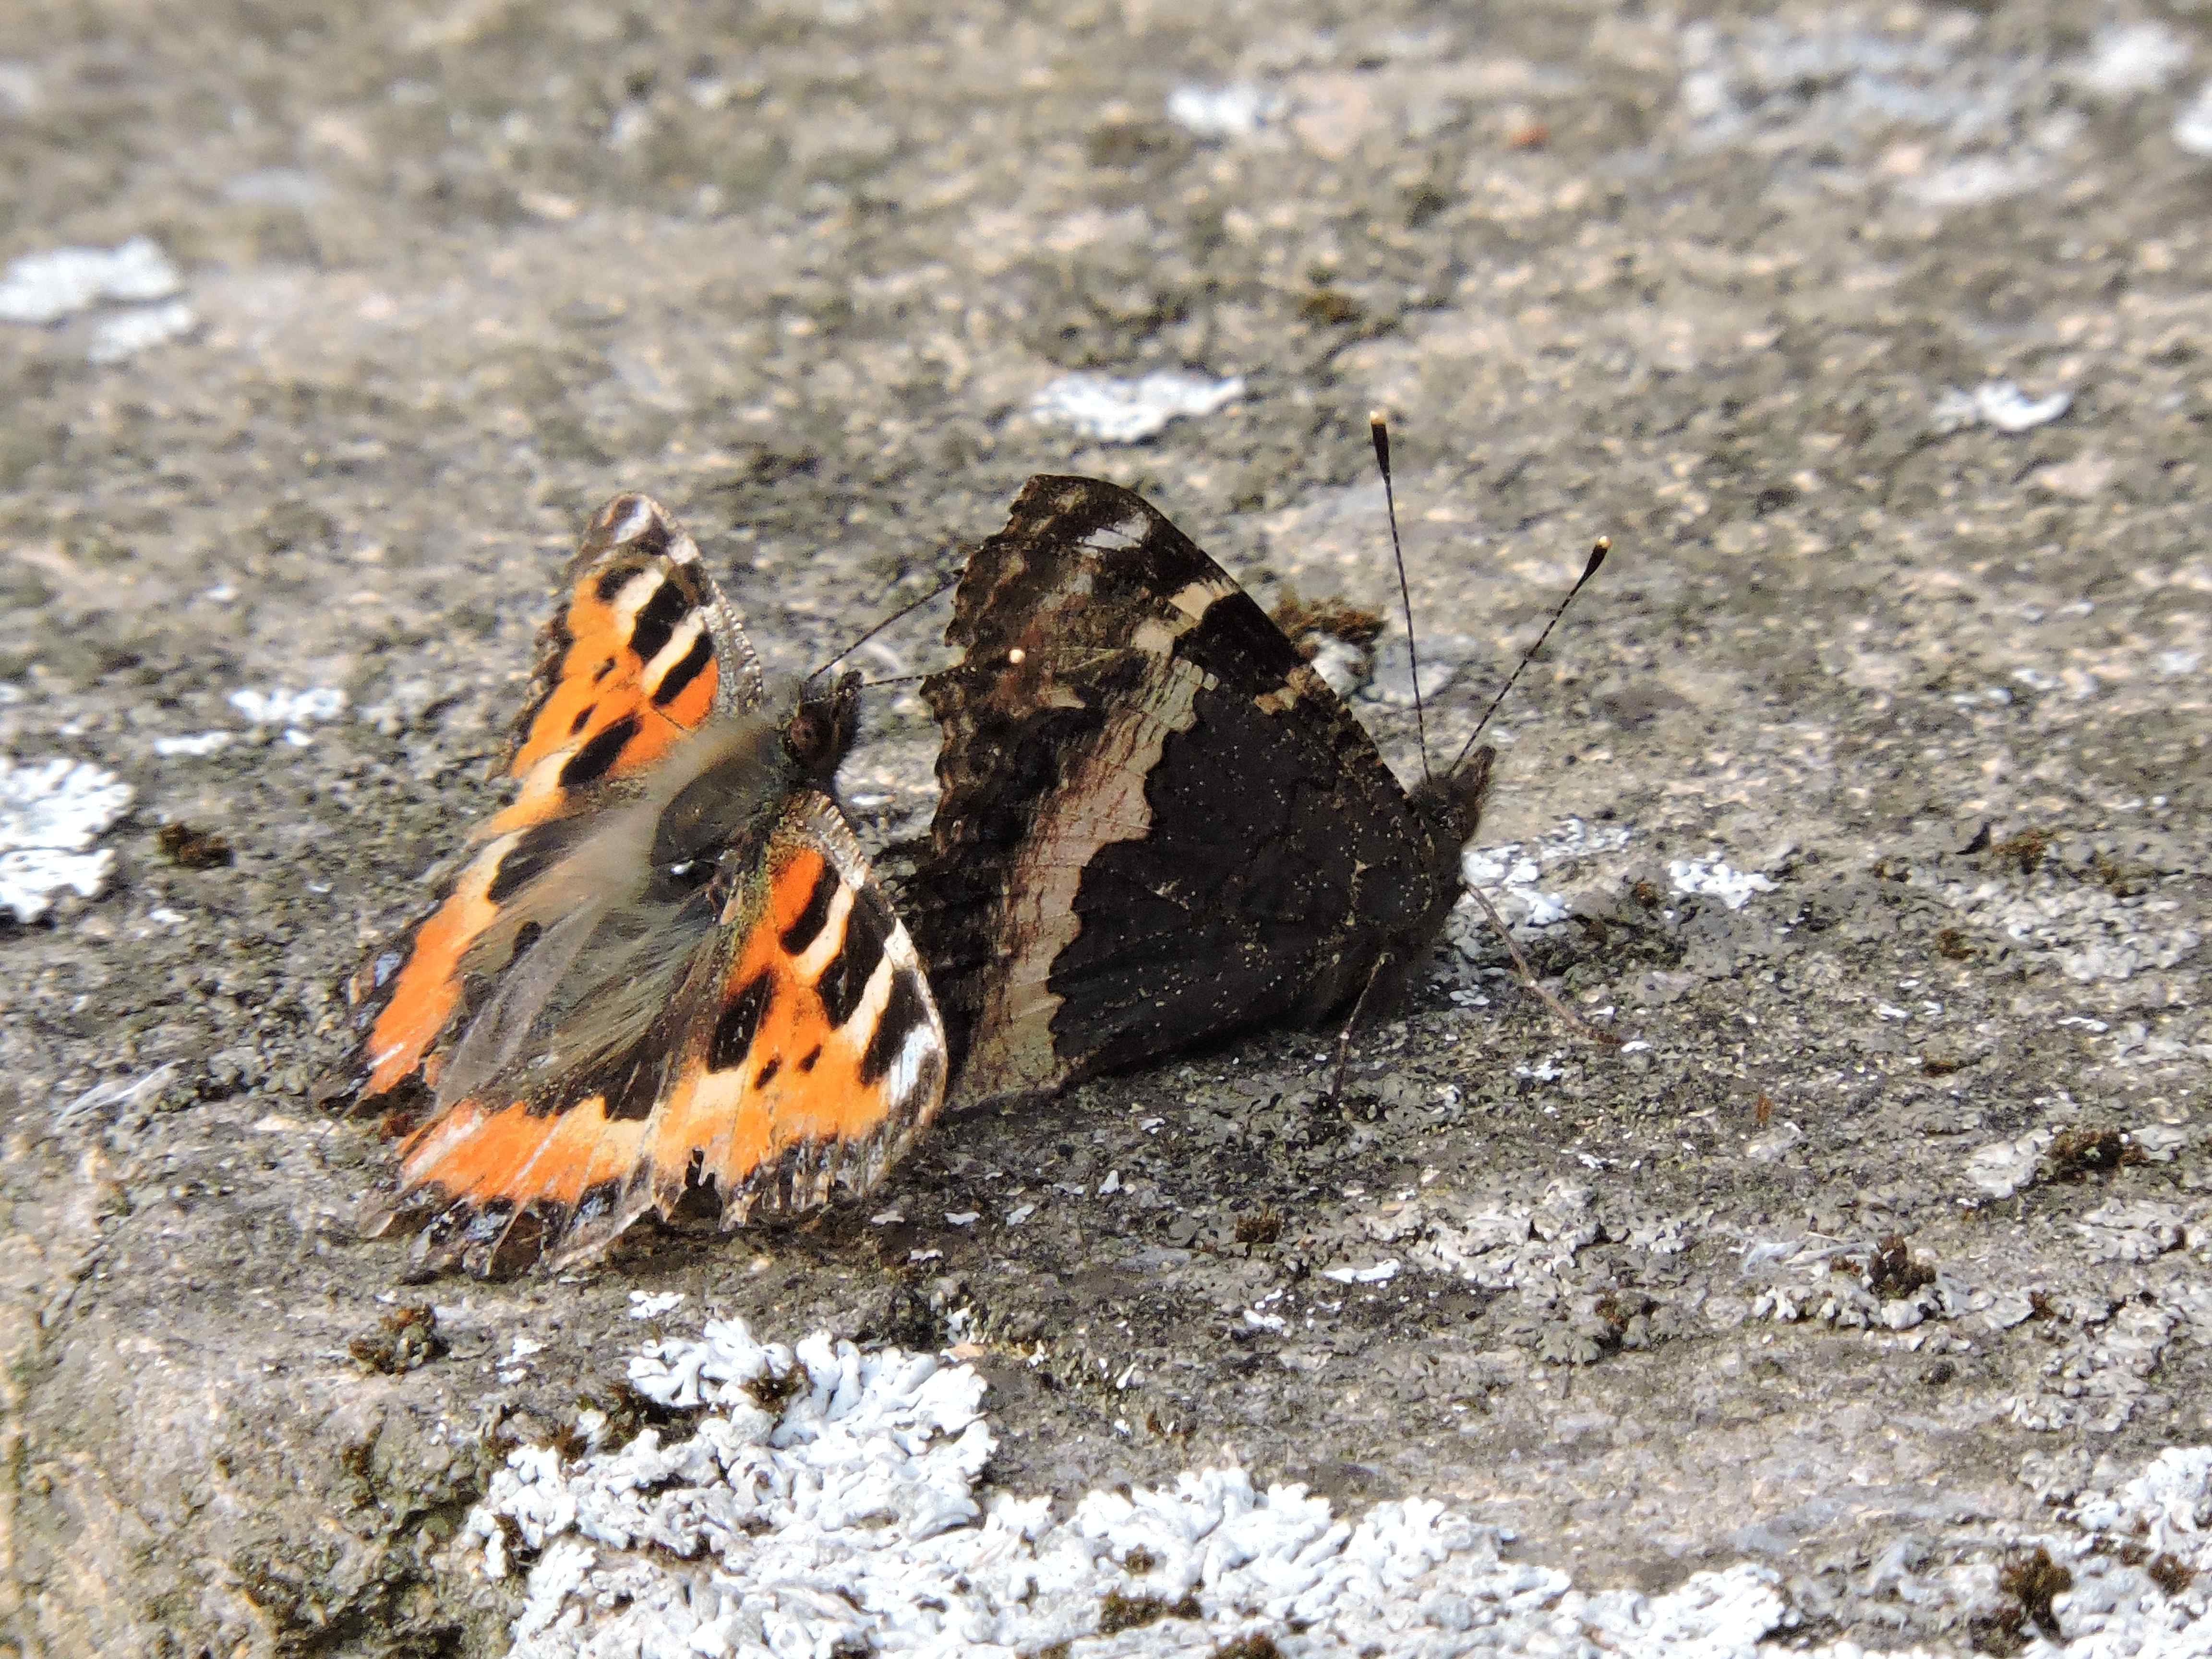 Small Tortoiseshells, one with its wings closed, revealing the cryptic dark underside for camouflage.